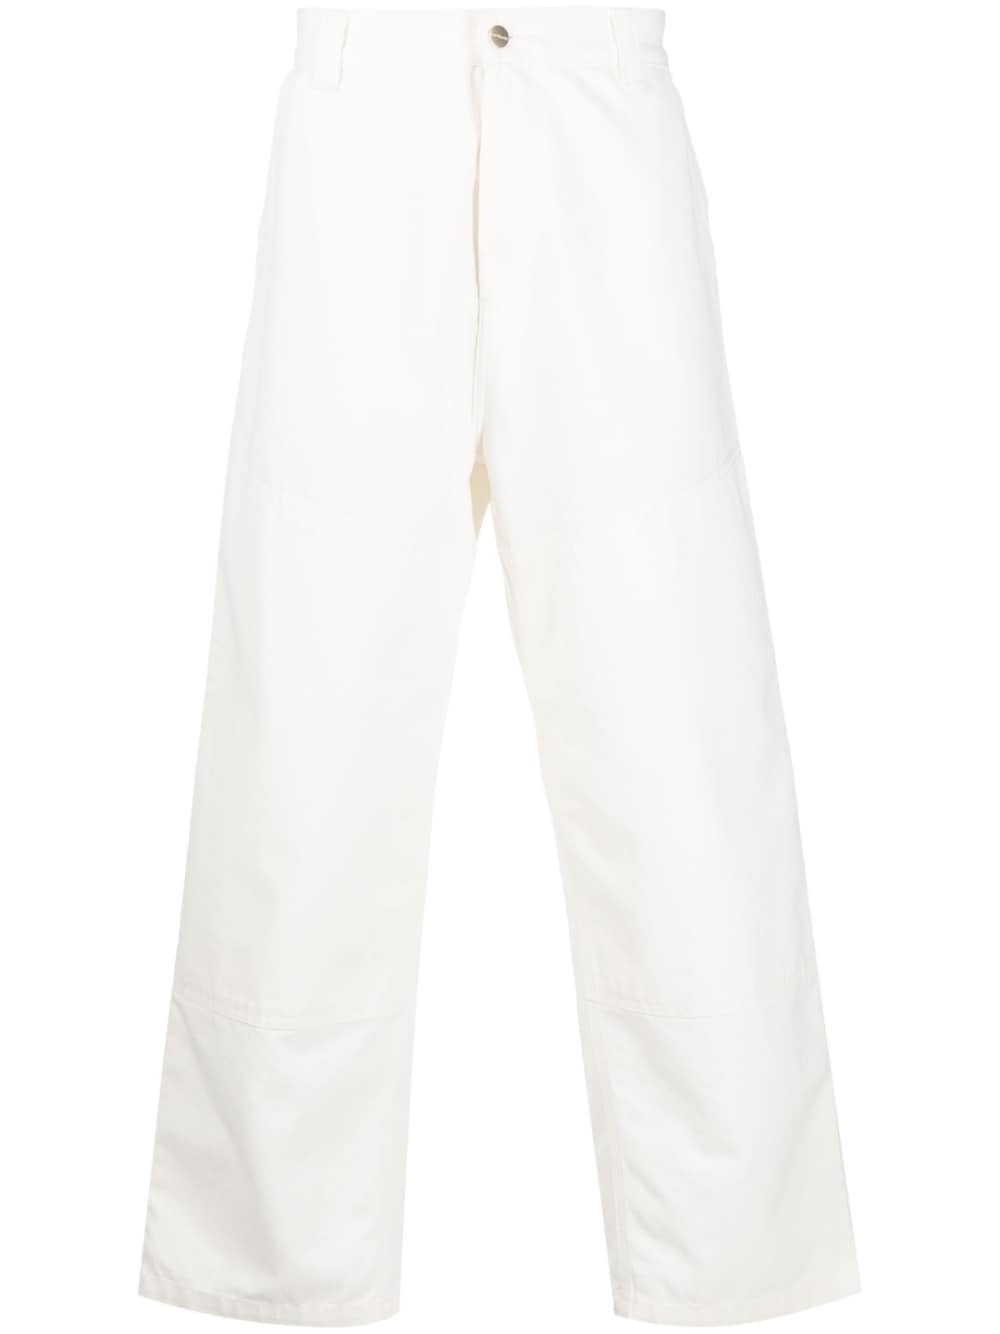 Cotton On Men's Loose Fit Pants | CoolSprings Galleria